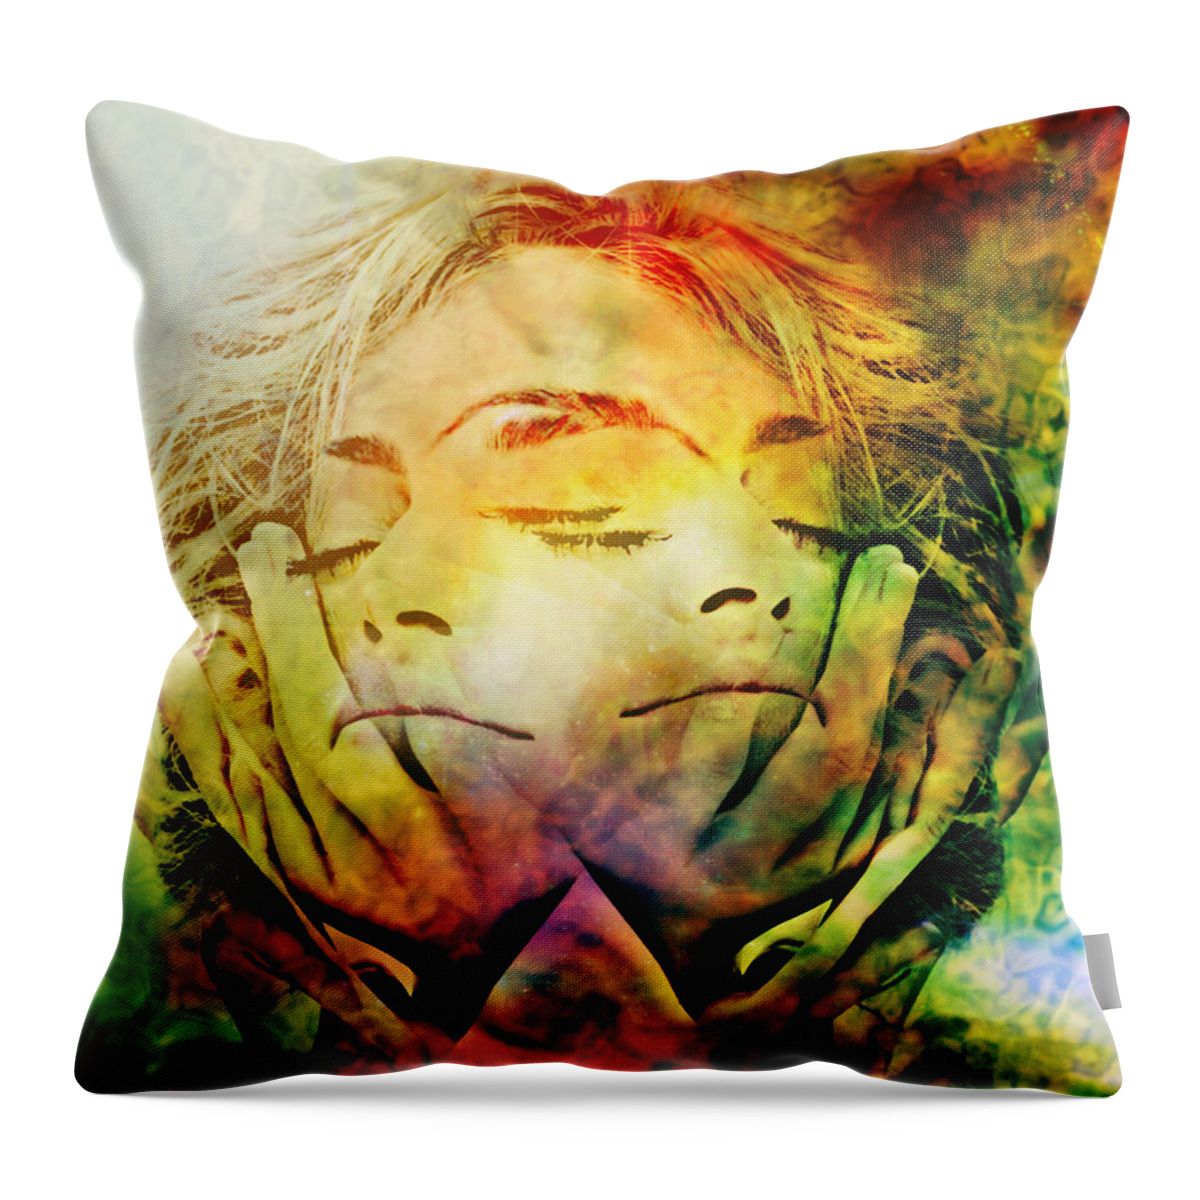 In Between Dreams Throw Pillow featuring the painting In Between Dreams by Ally White